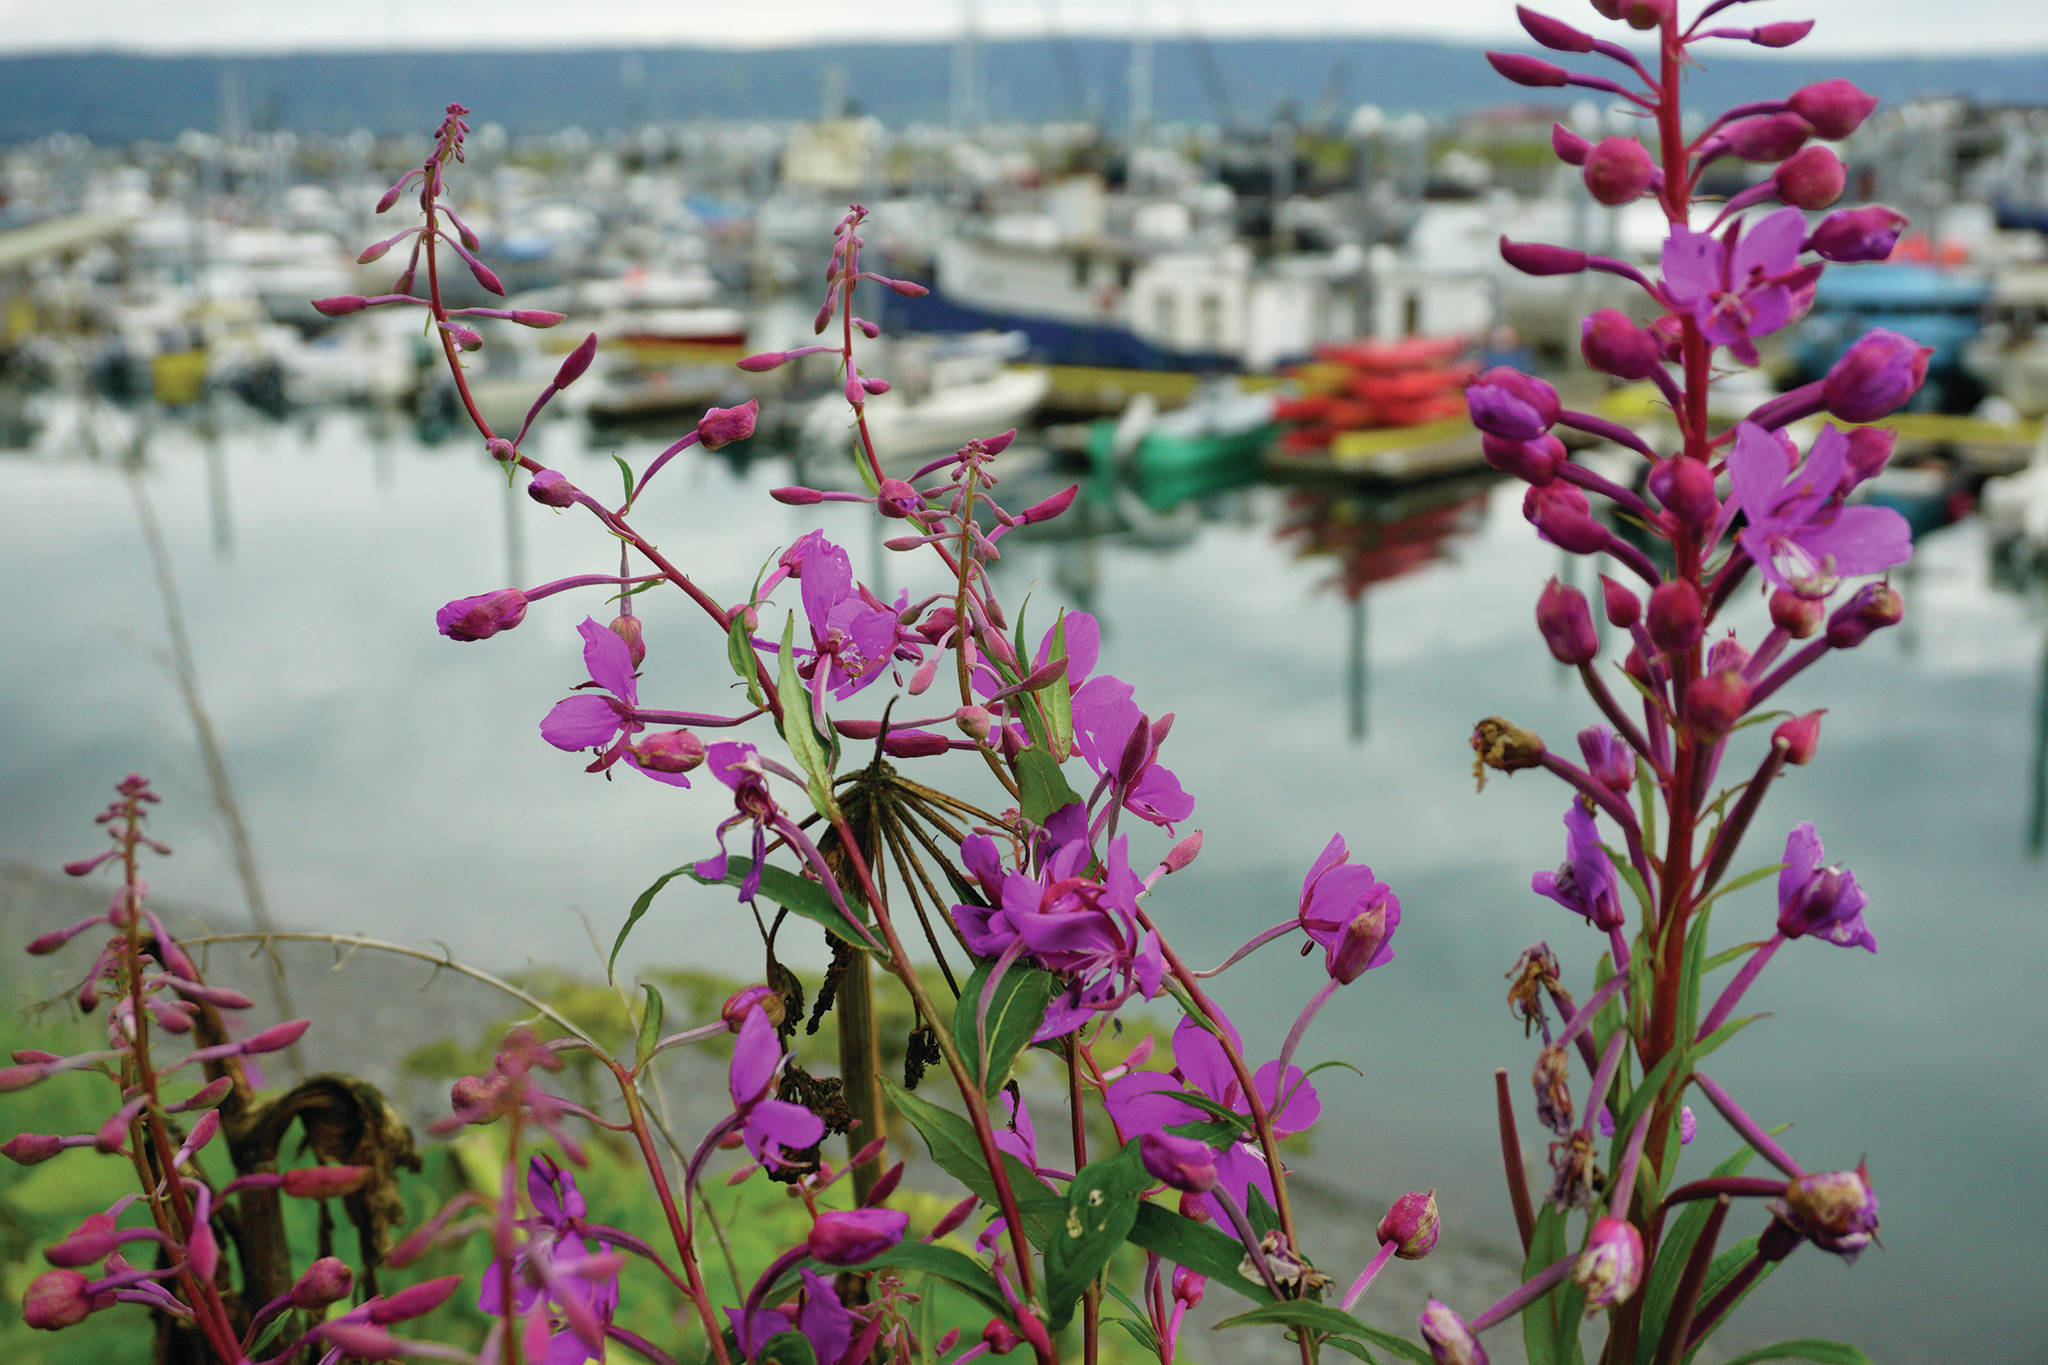 The last petals of fireweed begin to bloom on Aug. 3, 2020, at the Homer Harbor in Homer, Alaska. (Photo by Michael Armstrong/Homer News)